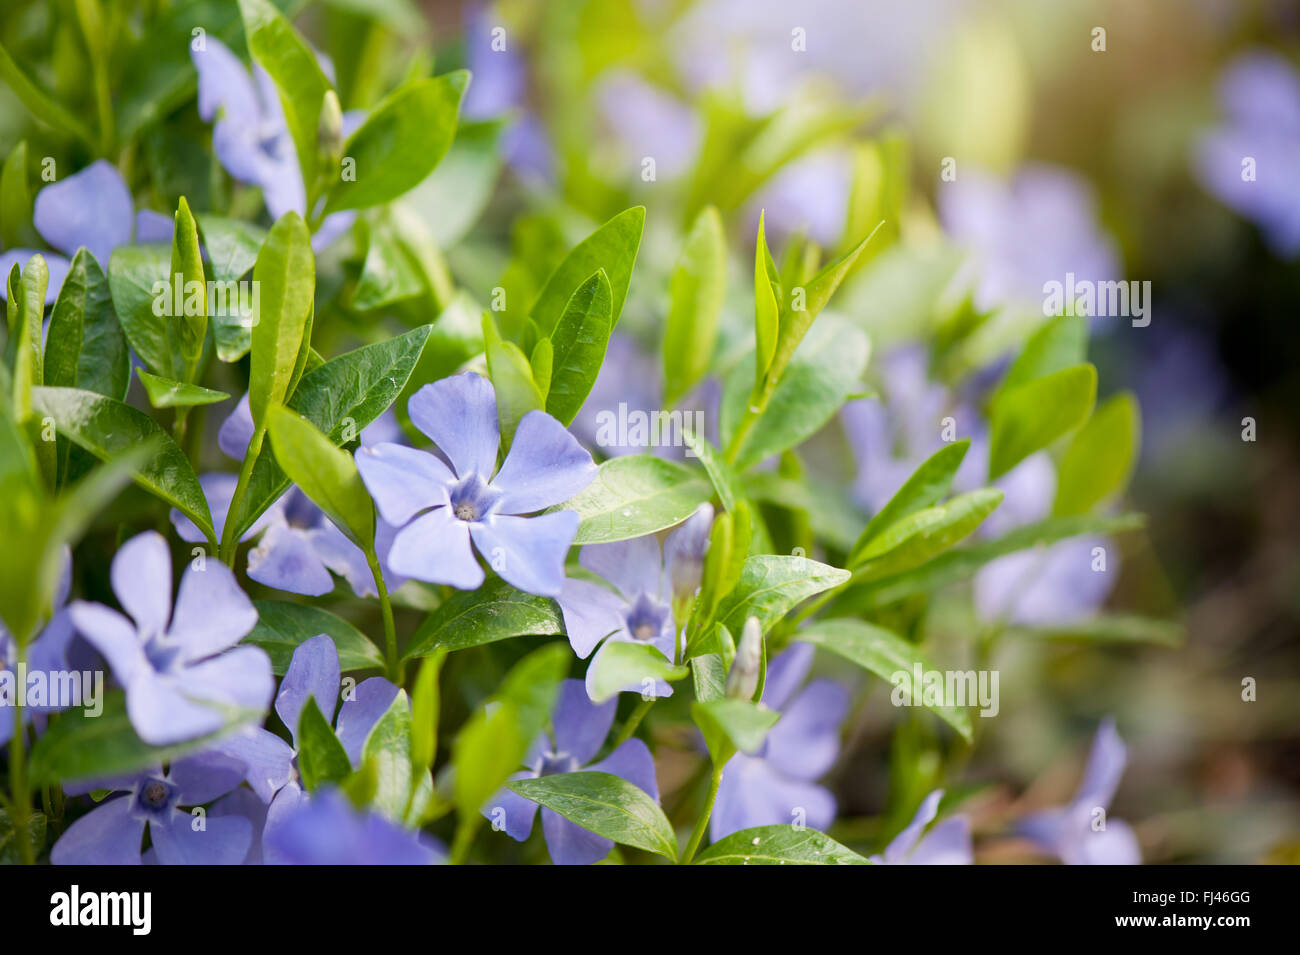 Vinca flowers macro, Apocynaceae family periwinkle or myrtle bright flowering plants with vibrant green leaves clumps Stock Photo